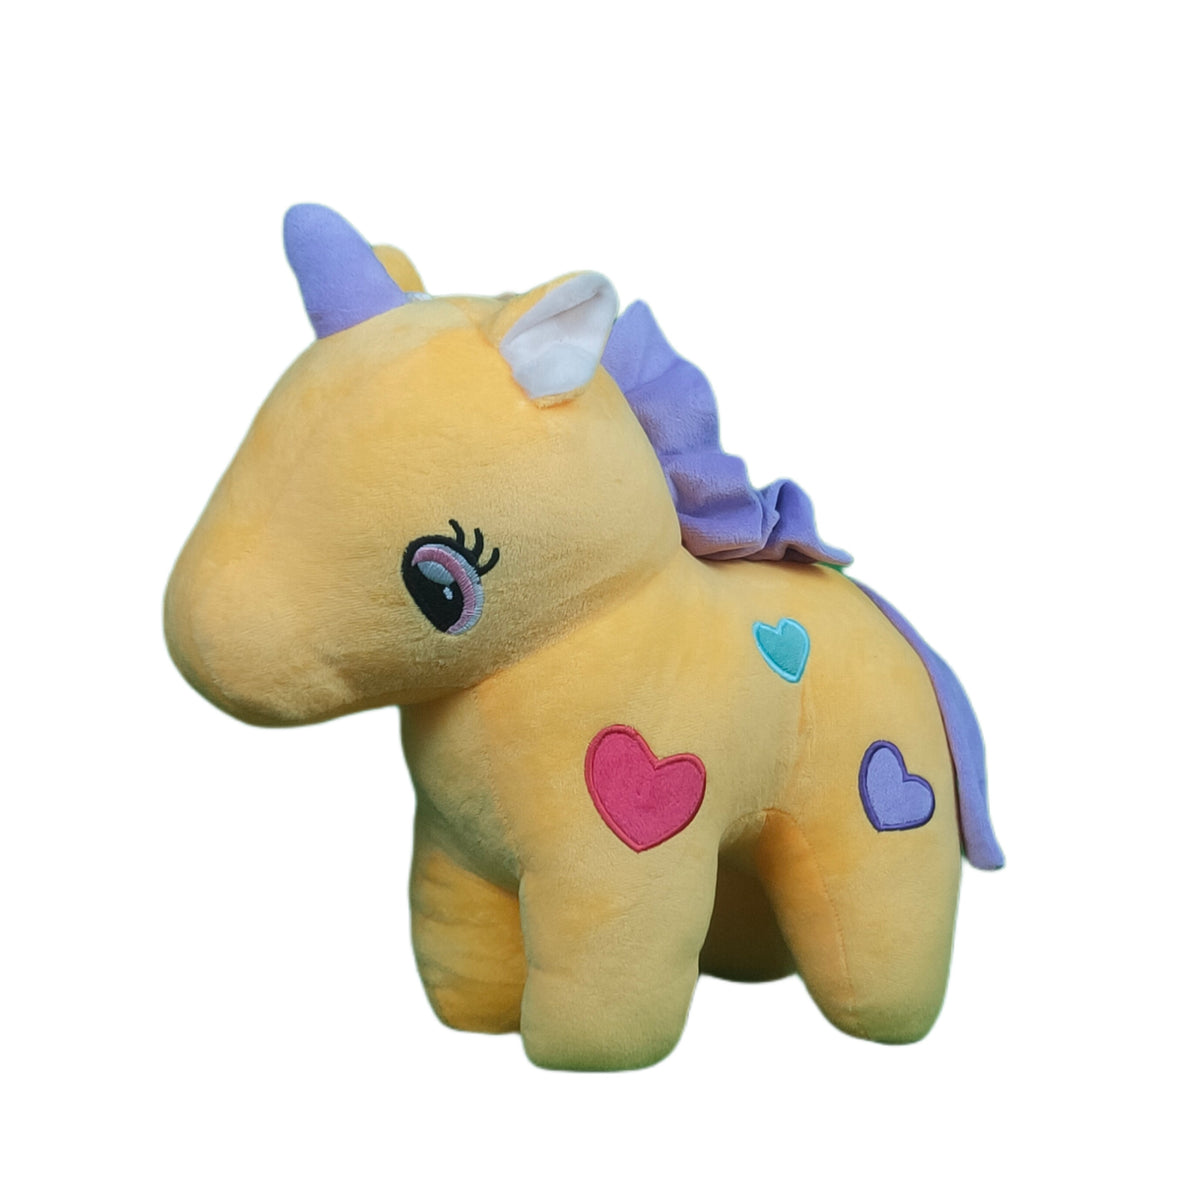 Play Hour Fairy Unicorn Plush Soft Toy For Ages 3 Years And Up - Yellow, 40cm